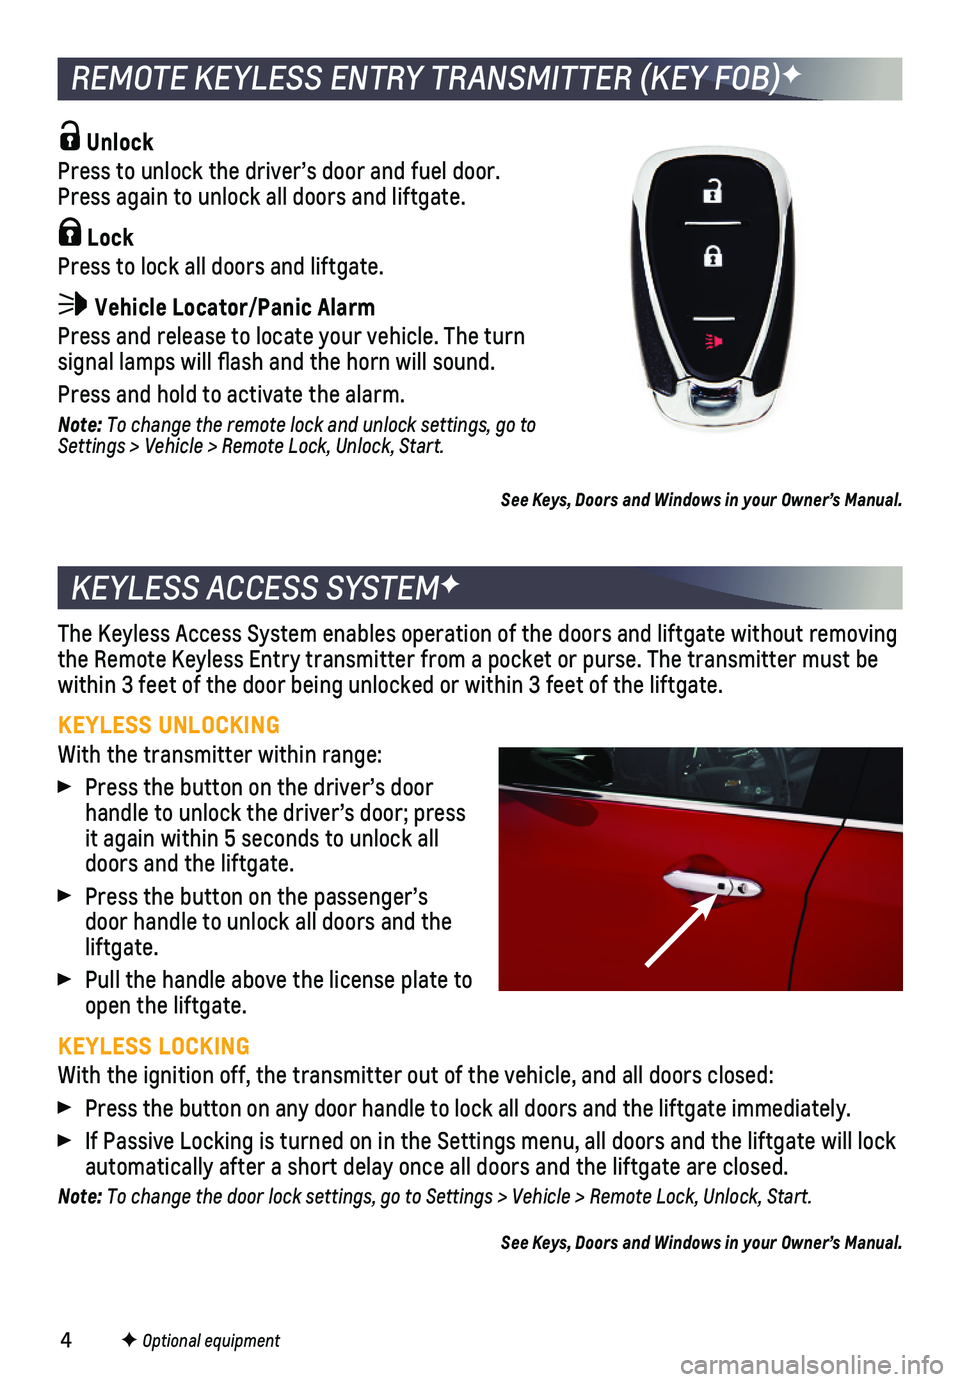 CHEVROLET SPARK 2021  Get To Know Guide 4
KEYLESS ACCESS SYSTEMF
The Keyless Access System enables operation of the doors and liftgate wi\
thout removing the Remote Keyless Entry transmitter from a pocket or purse. The transmi\
tter must be